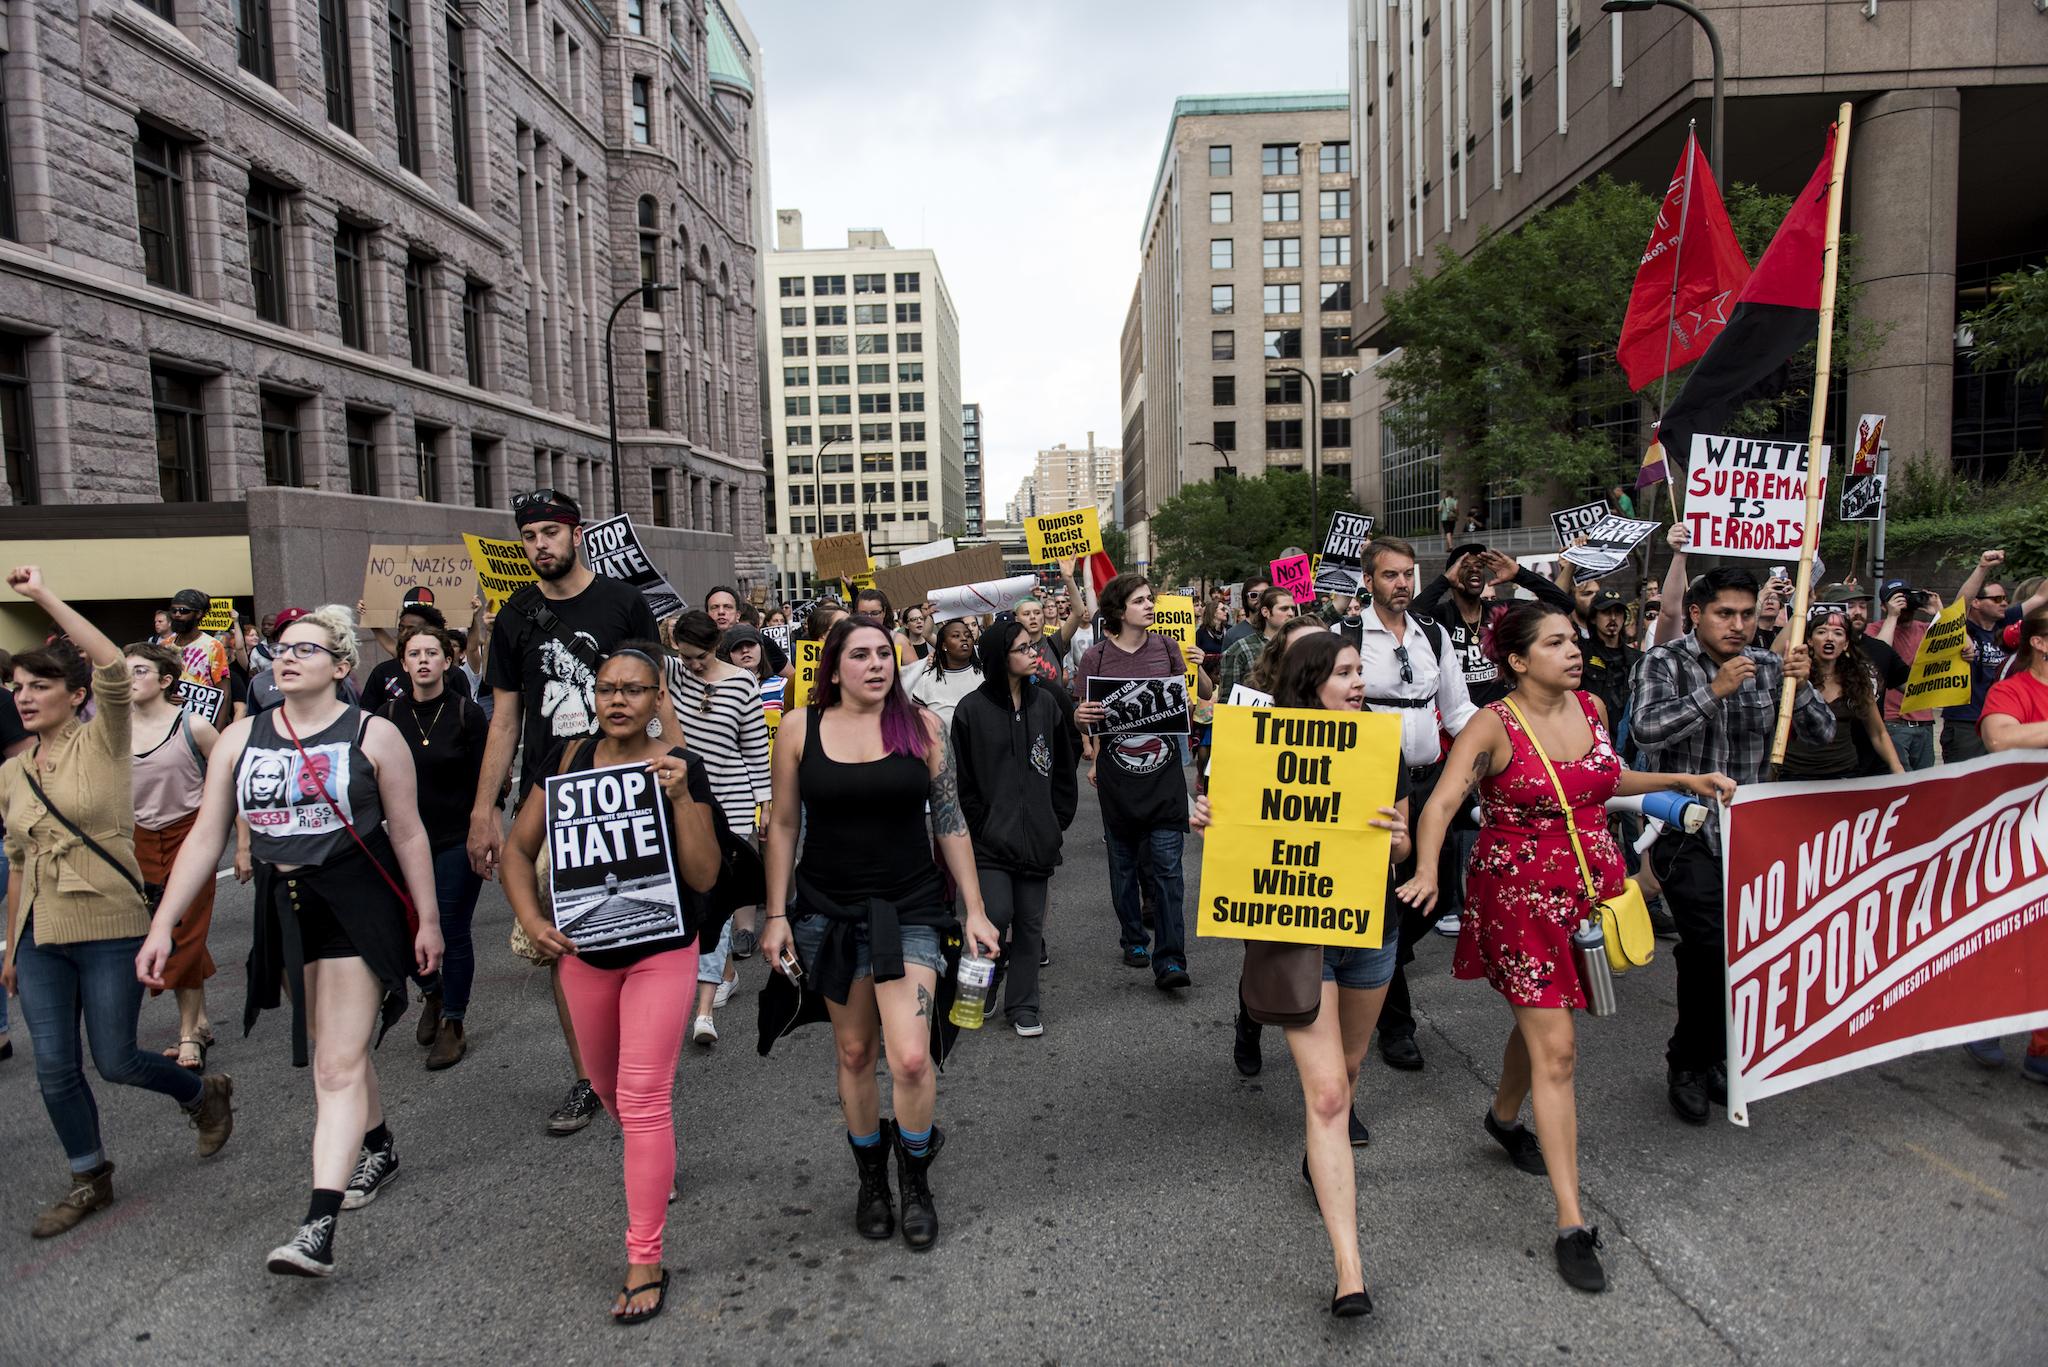 People march in downtown Minneapolis to protest racism and the violence in Charlottesville